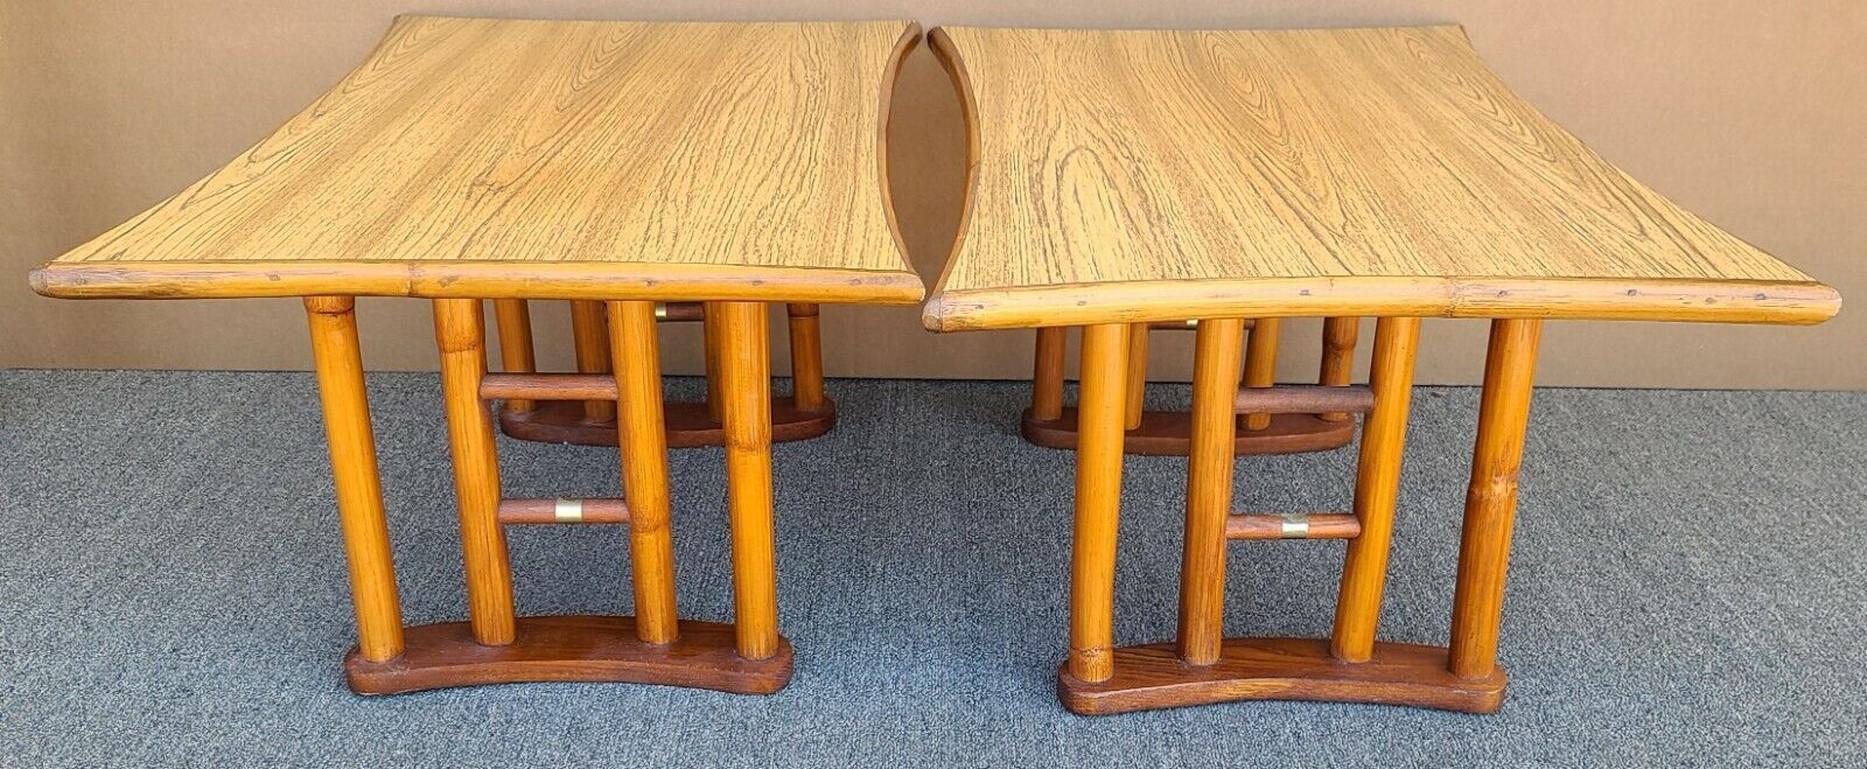 Vintage Bamboo Boho Chic Chinoiserie Side End Tables For Sale 1